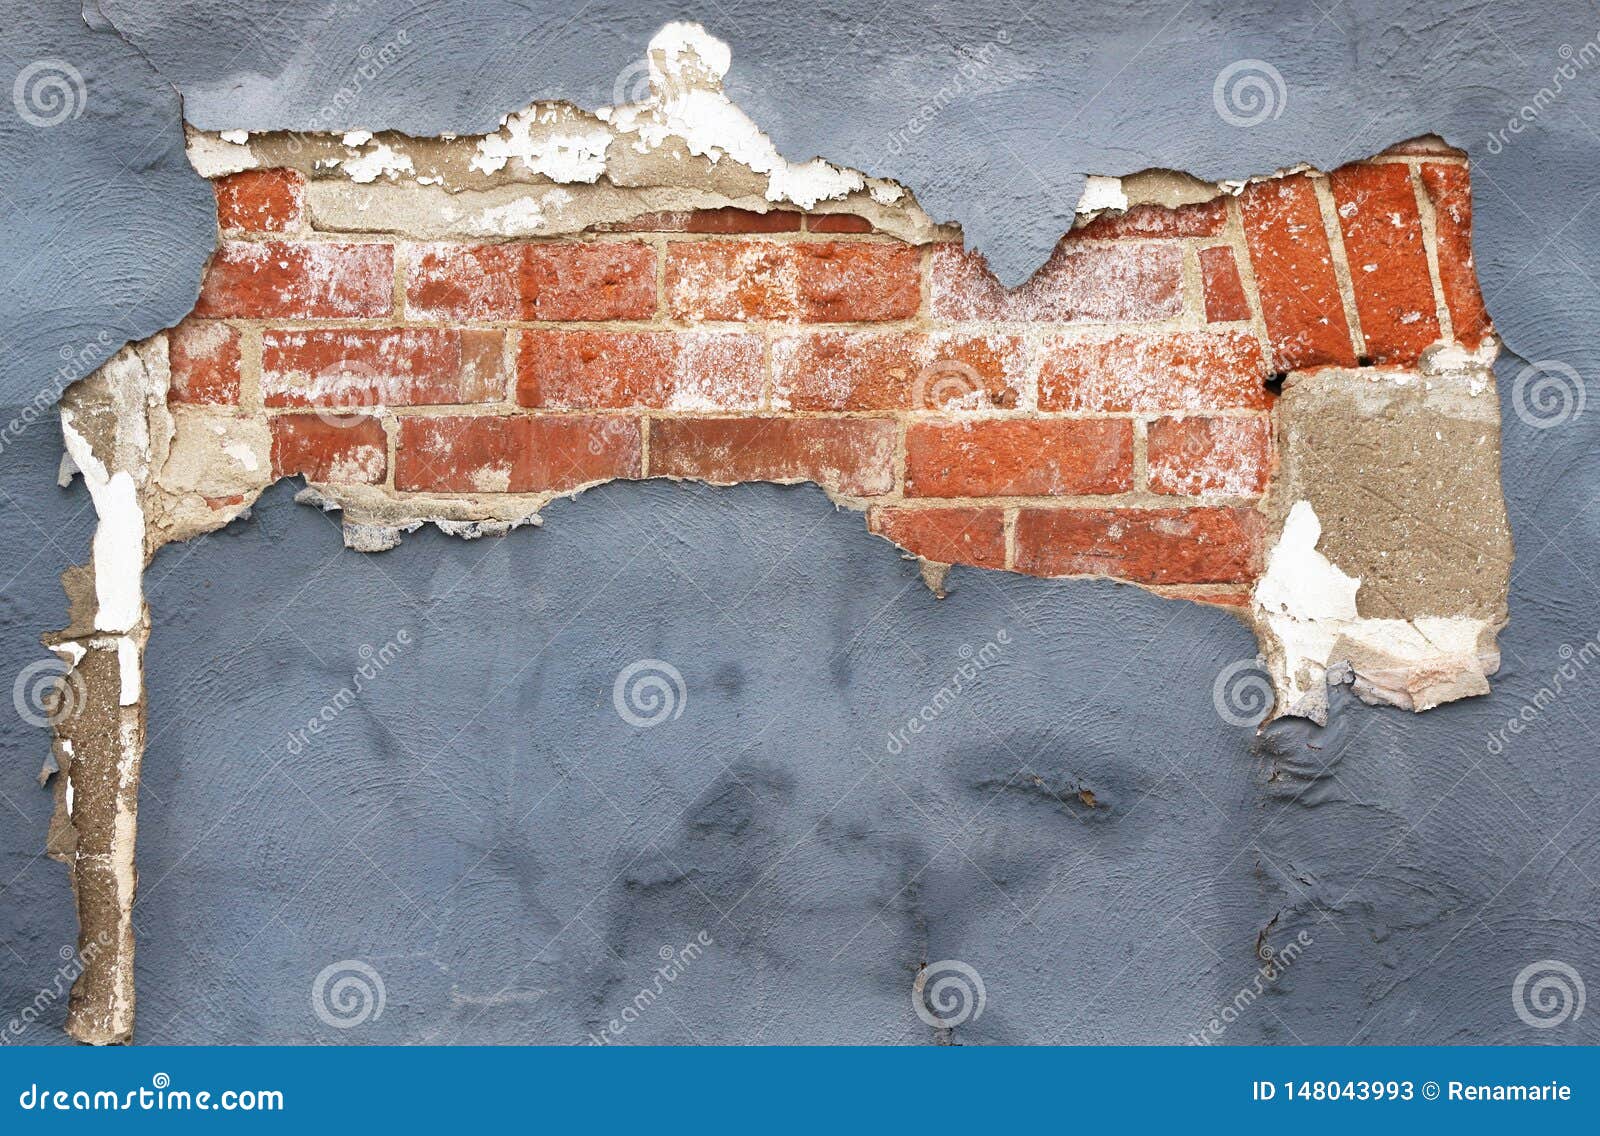 Brick Wall With Peeling Paint And Plaster In Need Of Repair Stock